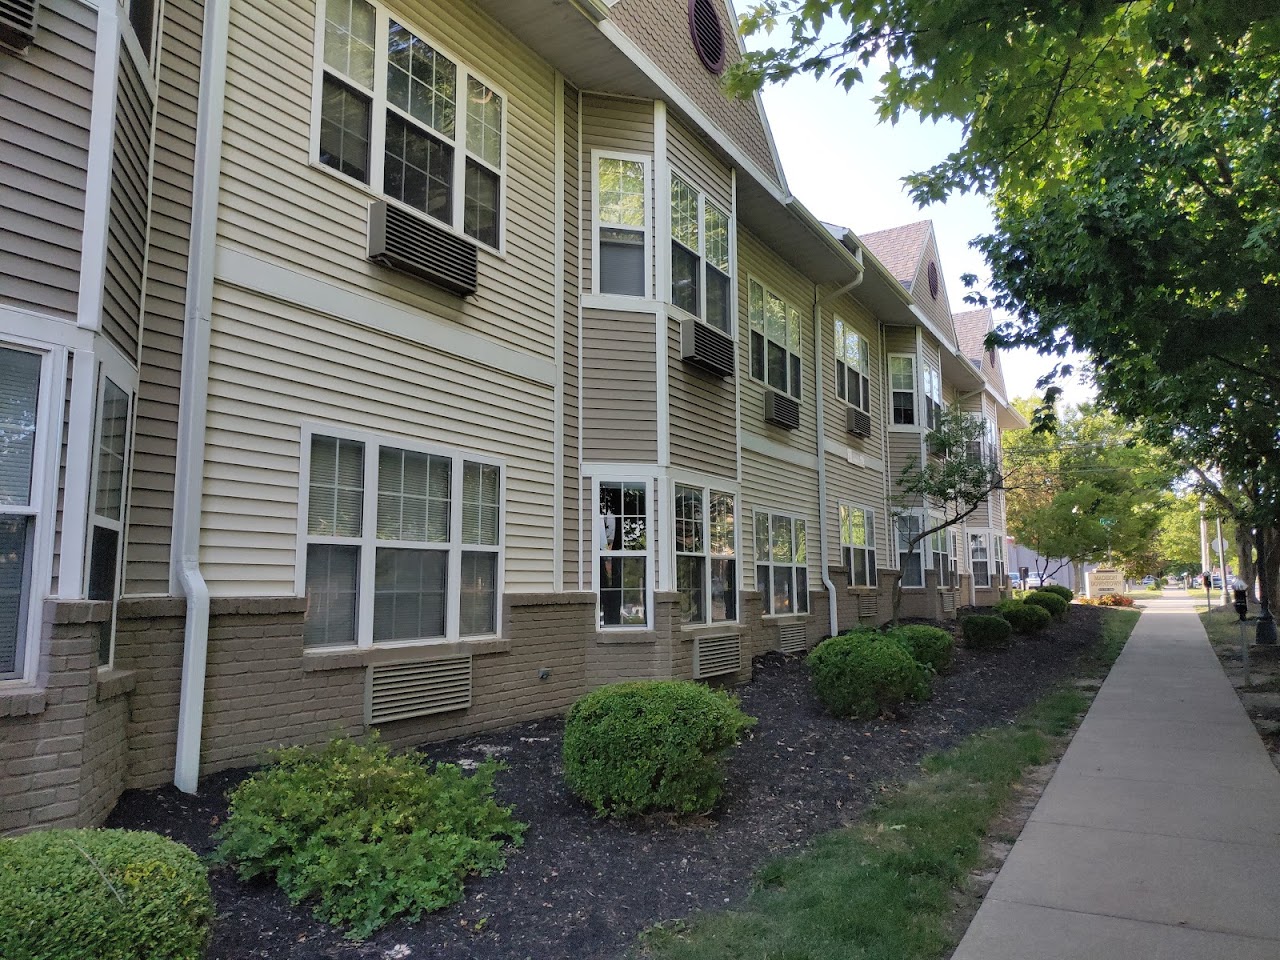 Photo of BICYCLE APTS. Affordable housing located at 200 S MADISON ST BLOOMINGTON, IN 47404